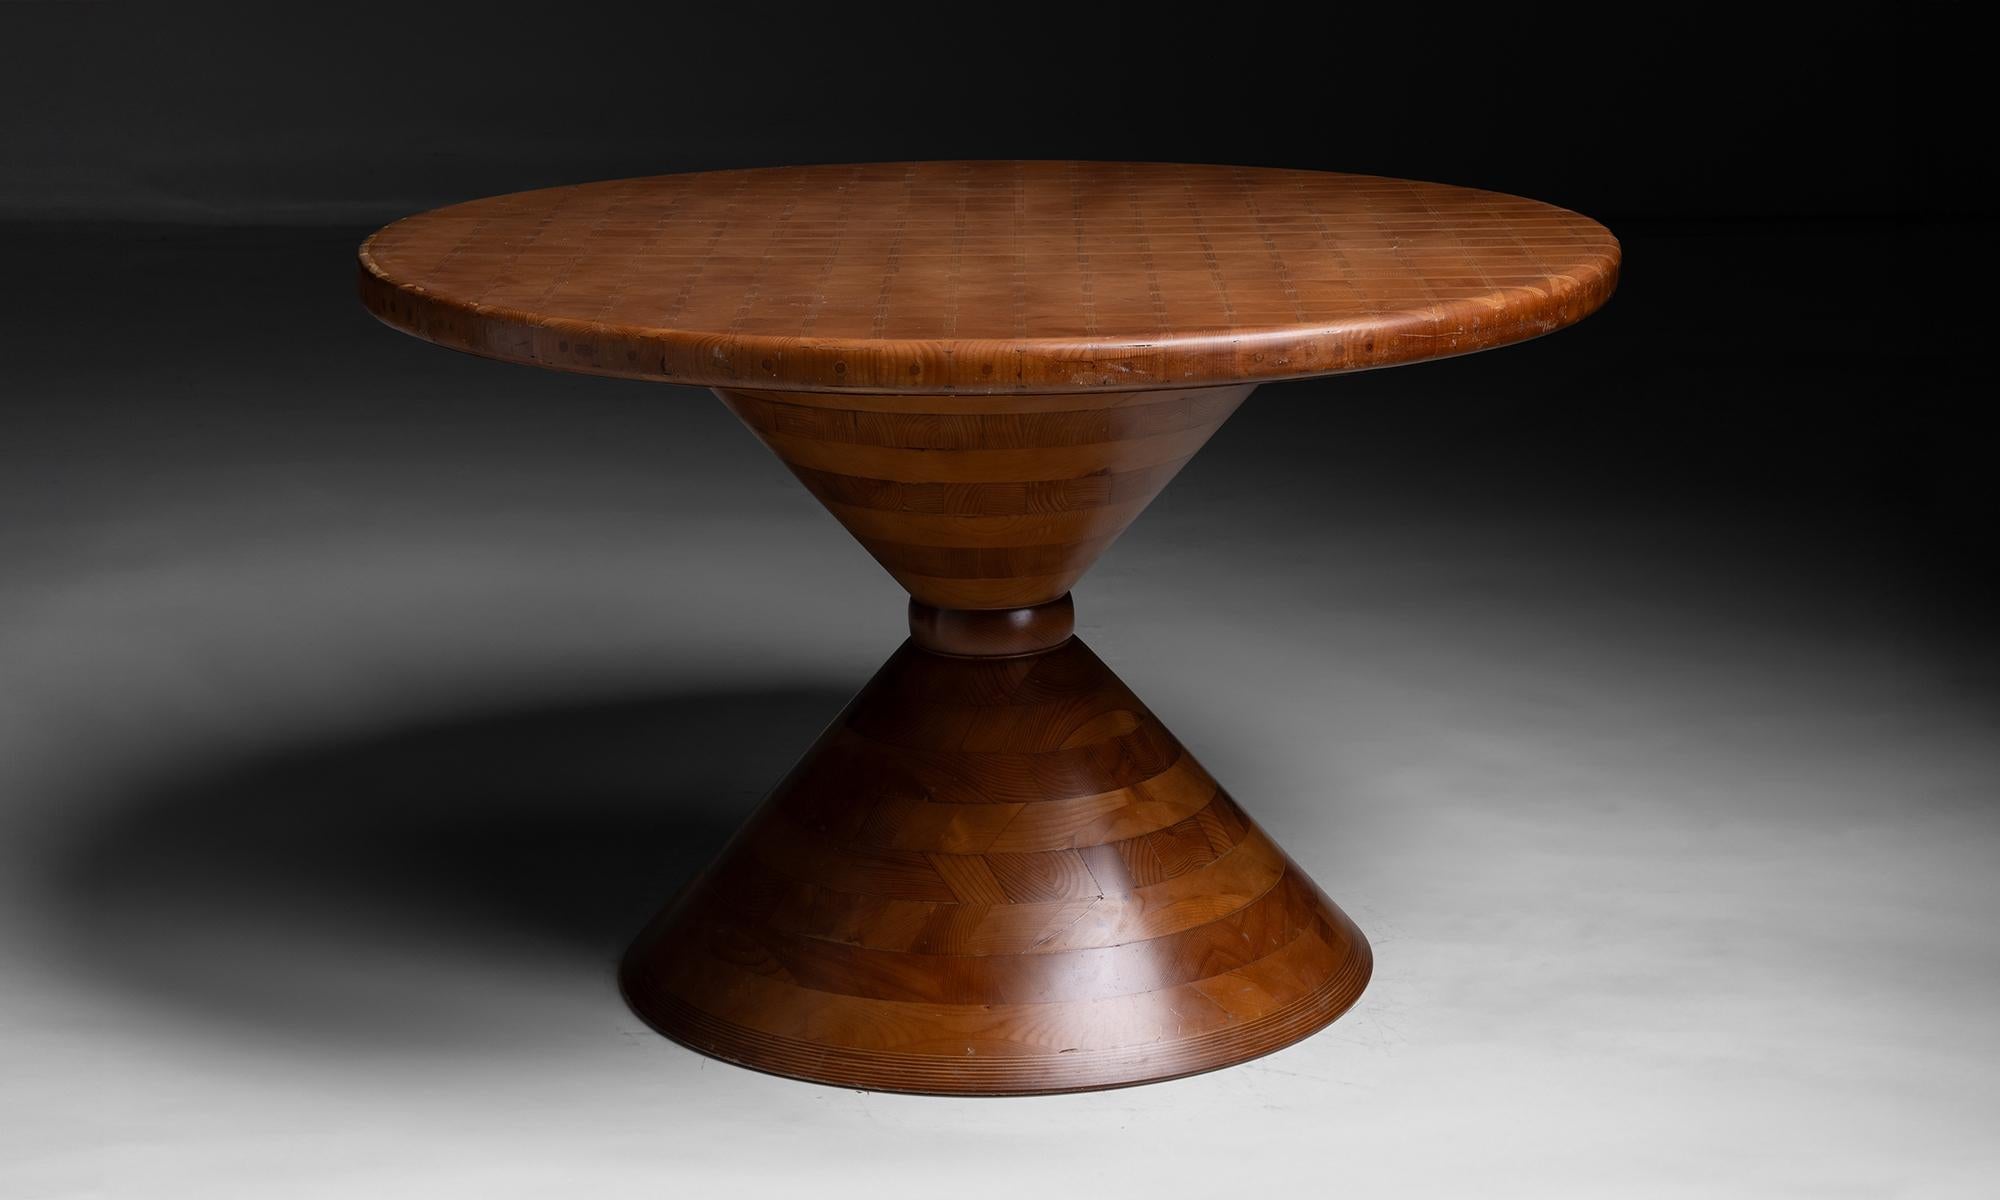 Inlay Dining / Centre Table
Italy circa 1960
Mahogany table with inlay, in two pieces.
48